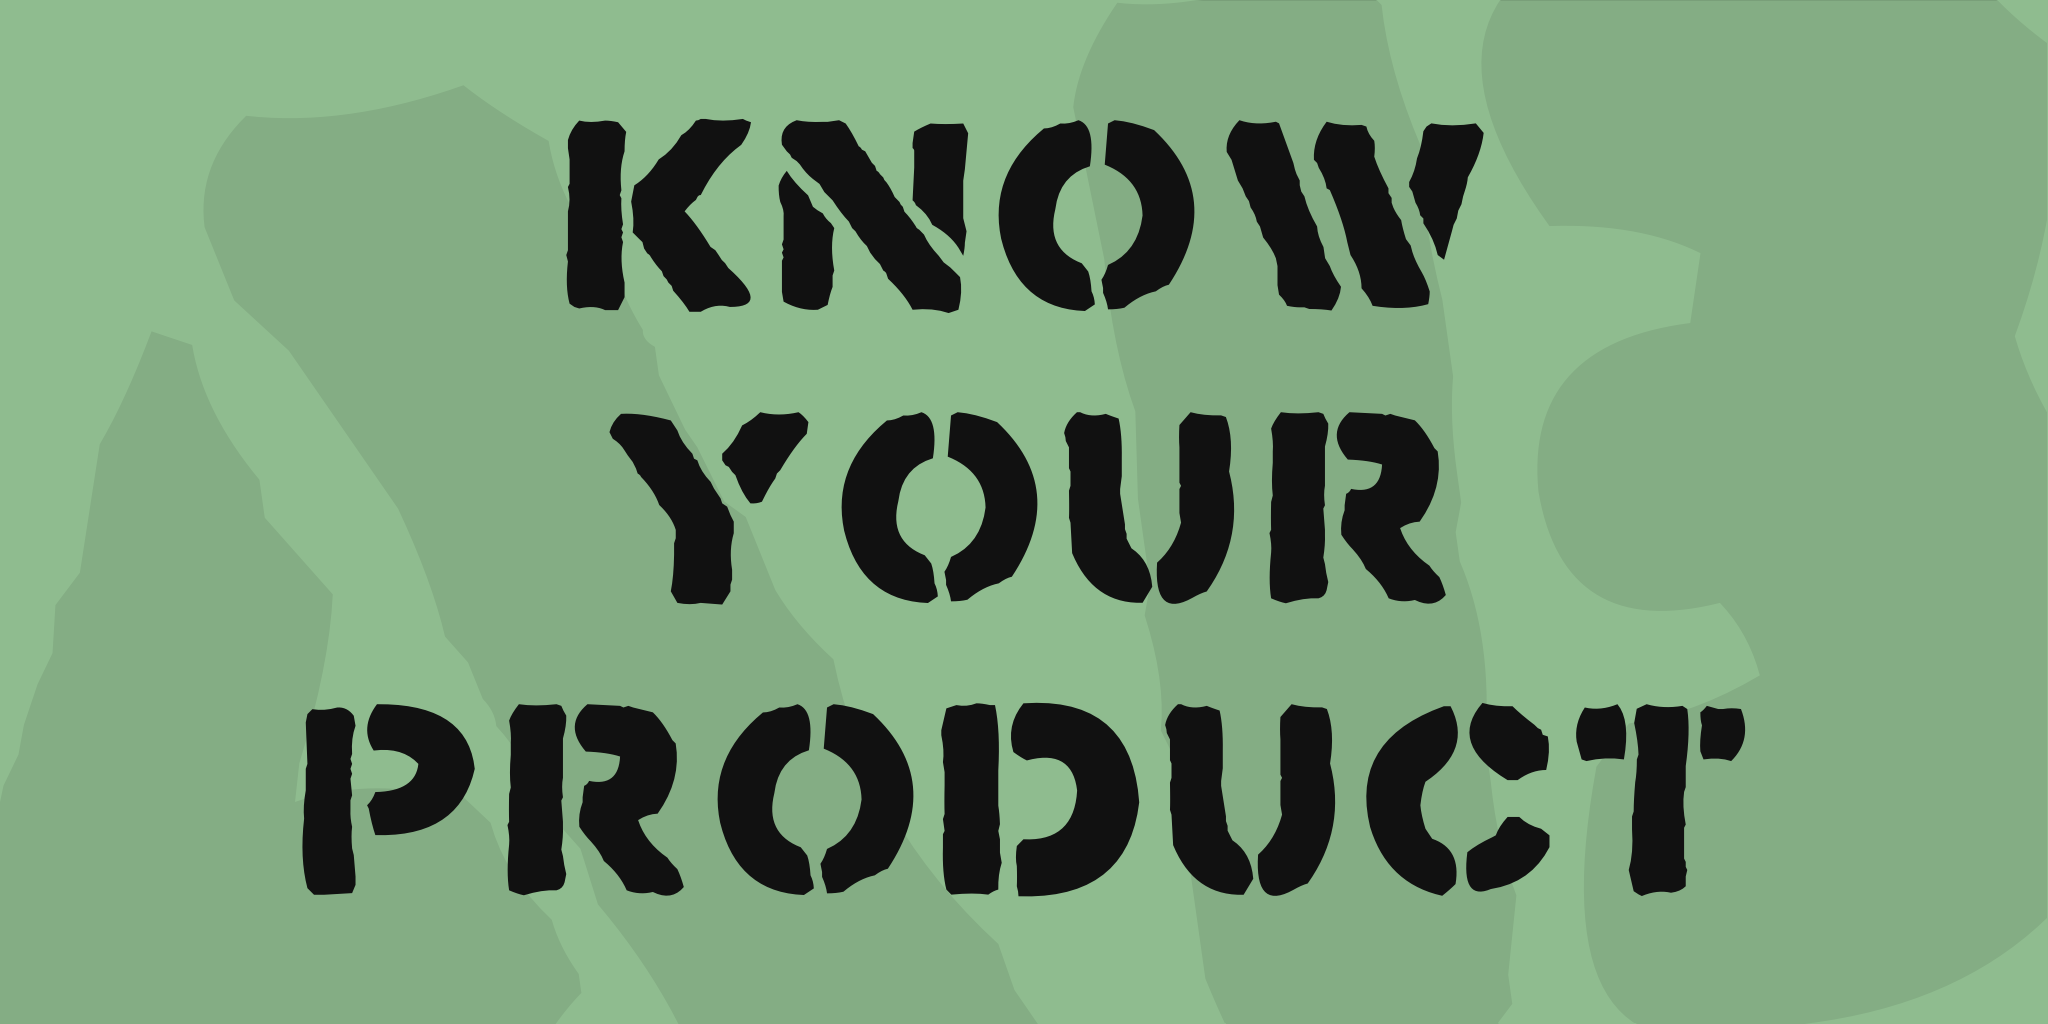 Know Your Product